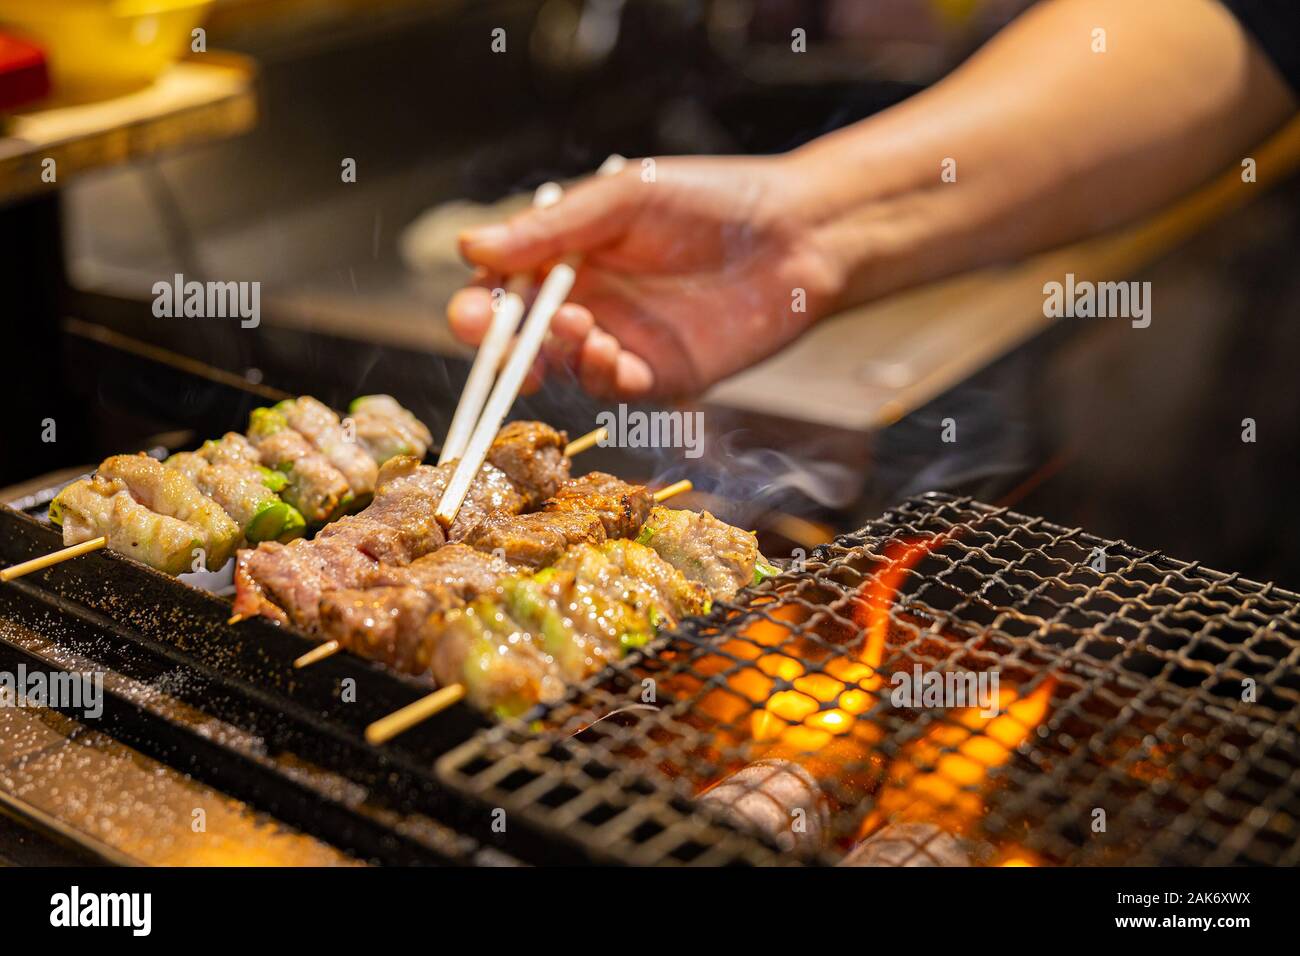 Vendor preparing meat on barbecue grill in Japan Stock Photo